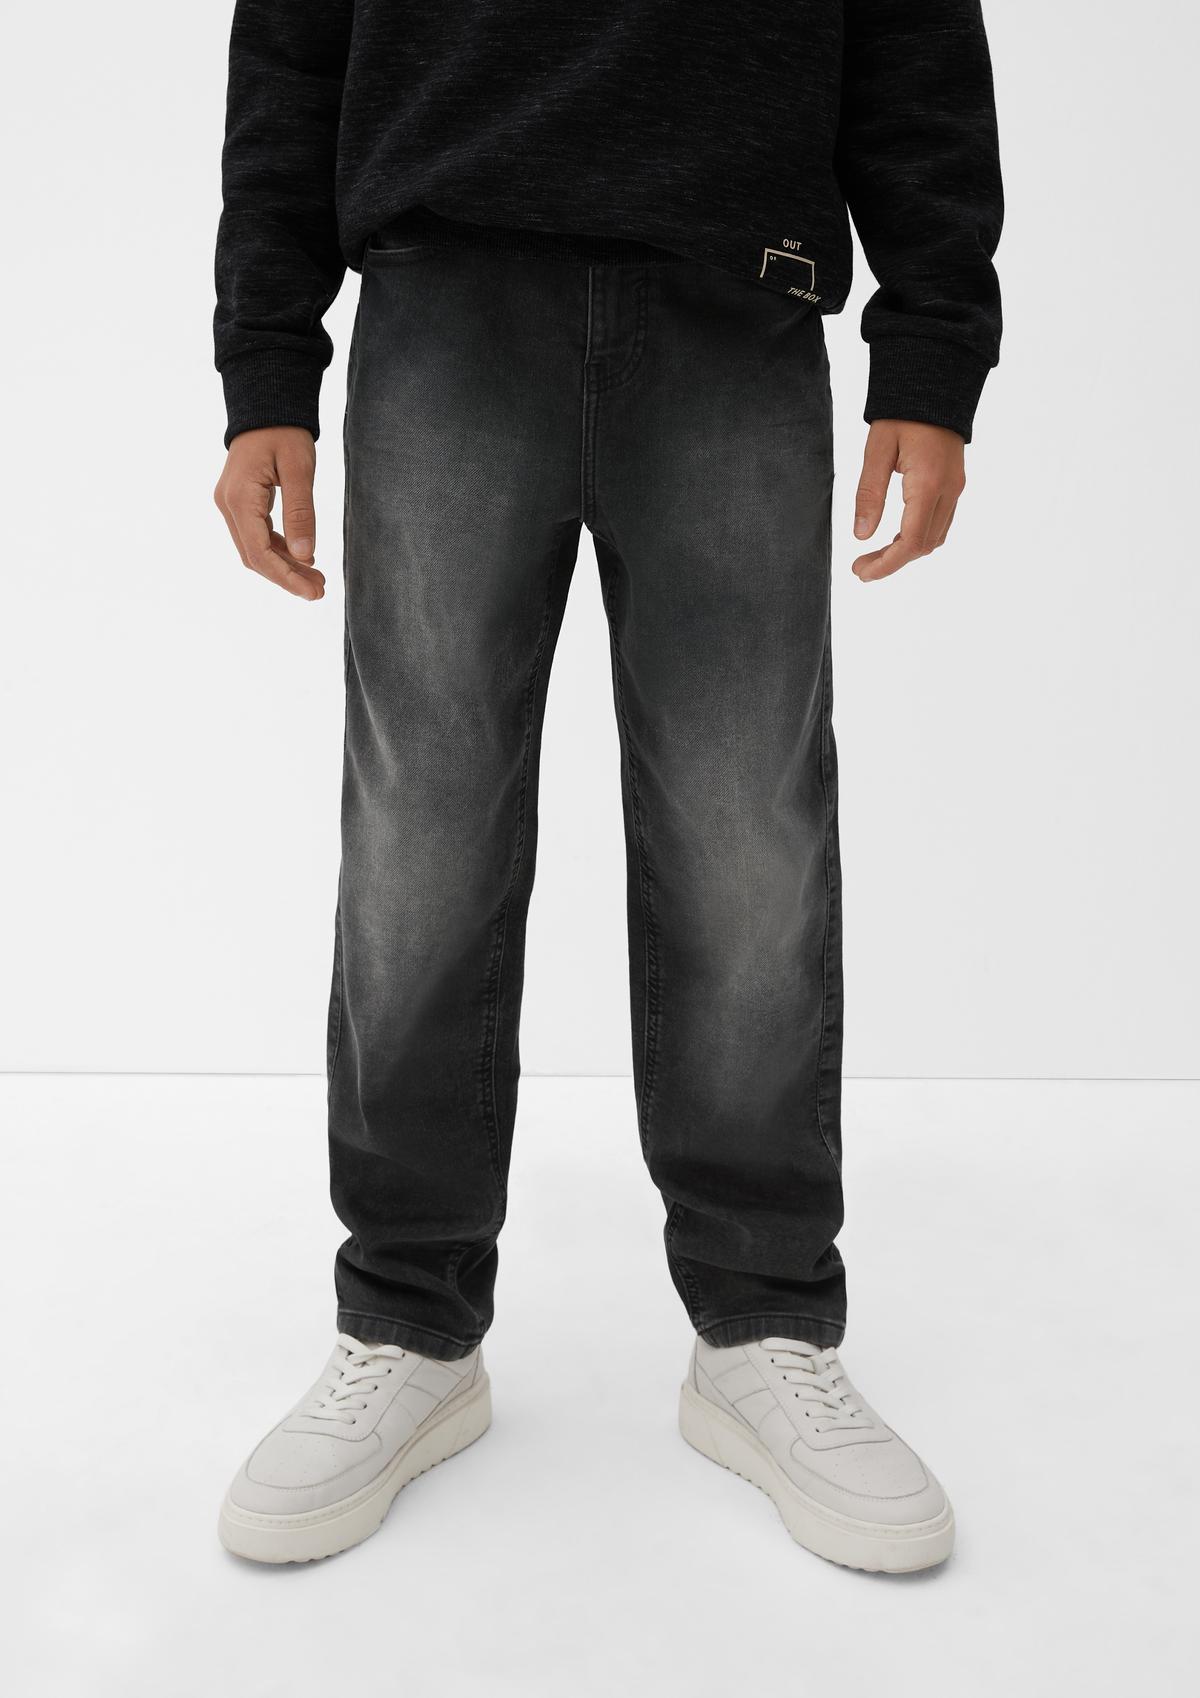 s.Oliver Jeans / Relaxed Fit / Mid Rise / Tapered Leg